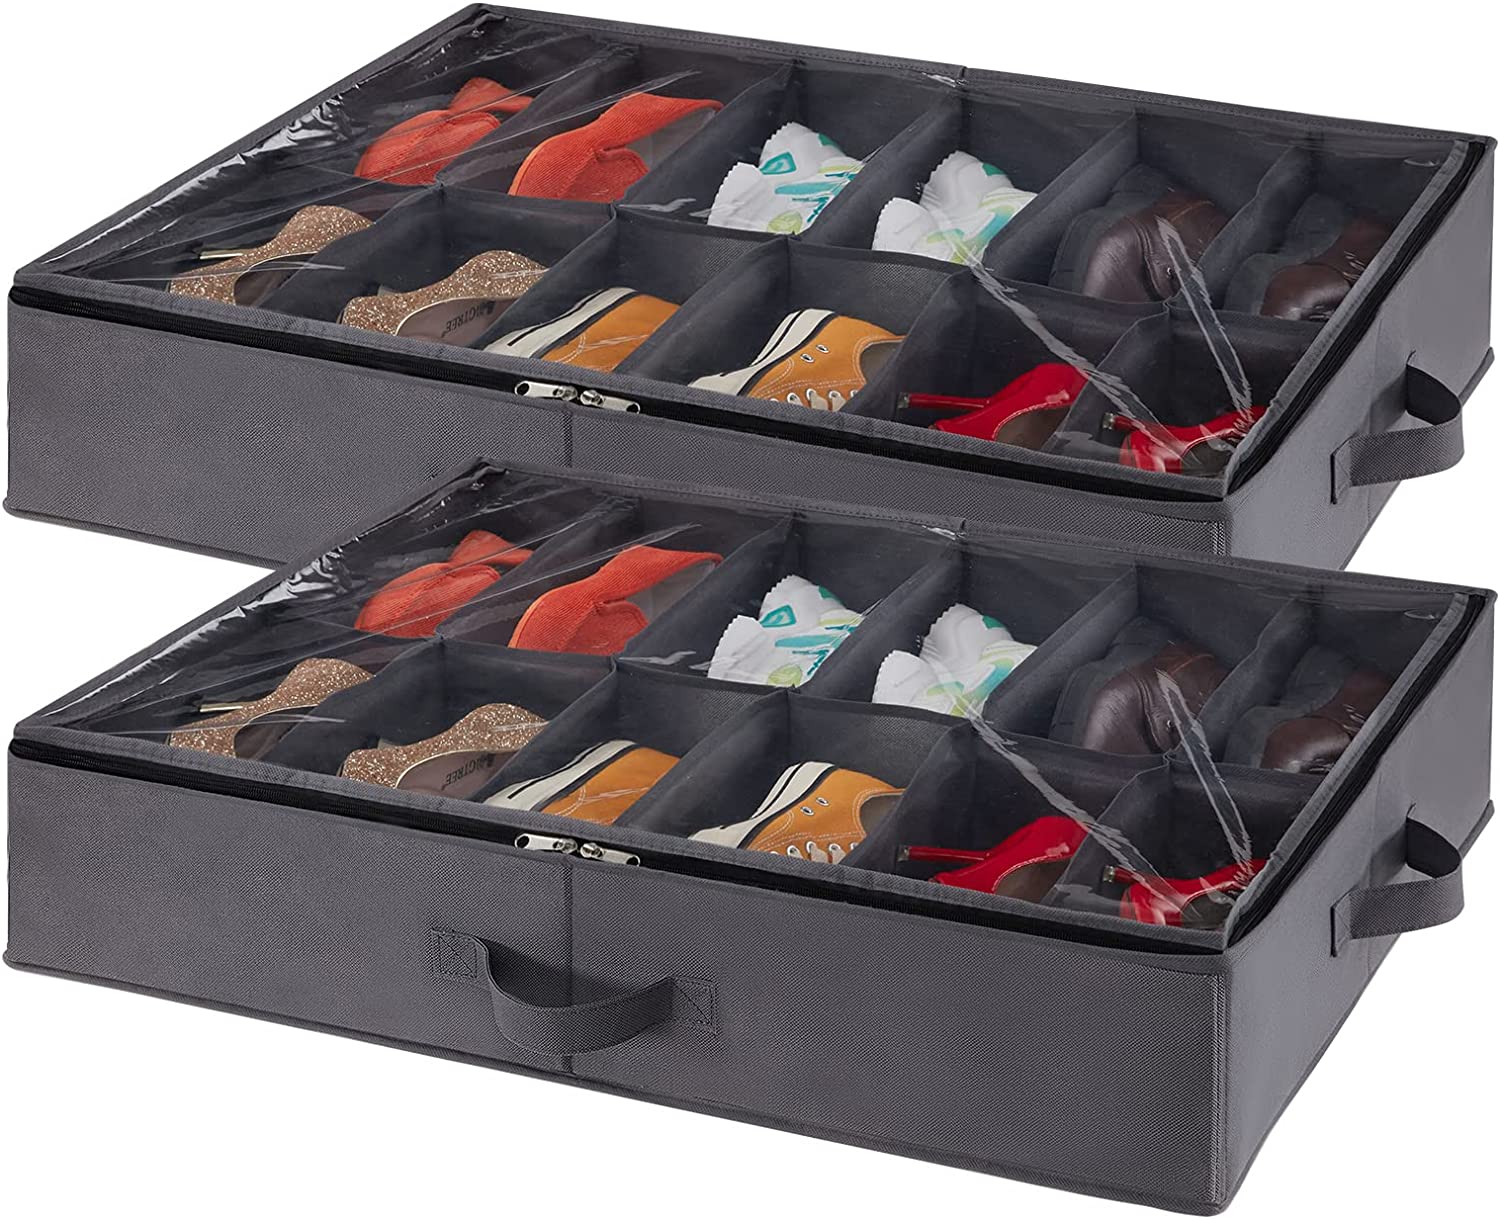 Most Organized Shoe Box Ever! for your Amazing interior design